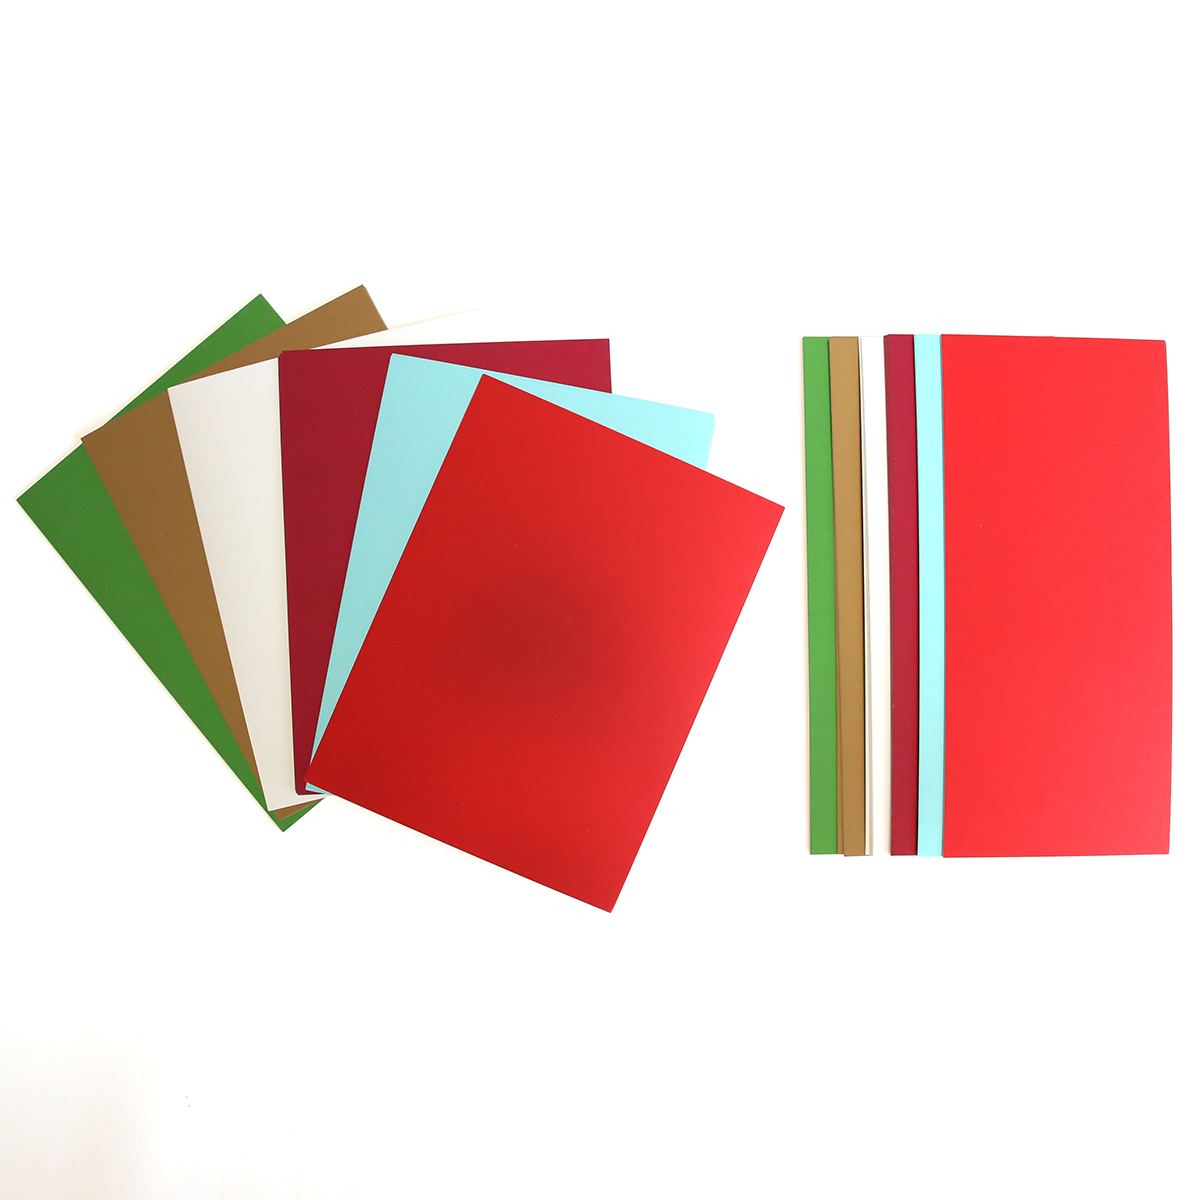 A set of red, green, and blue colored cards.